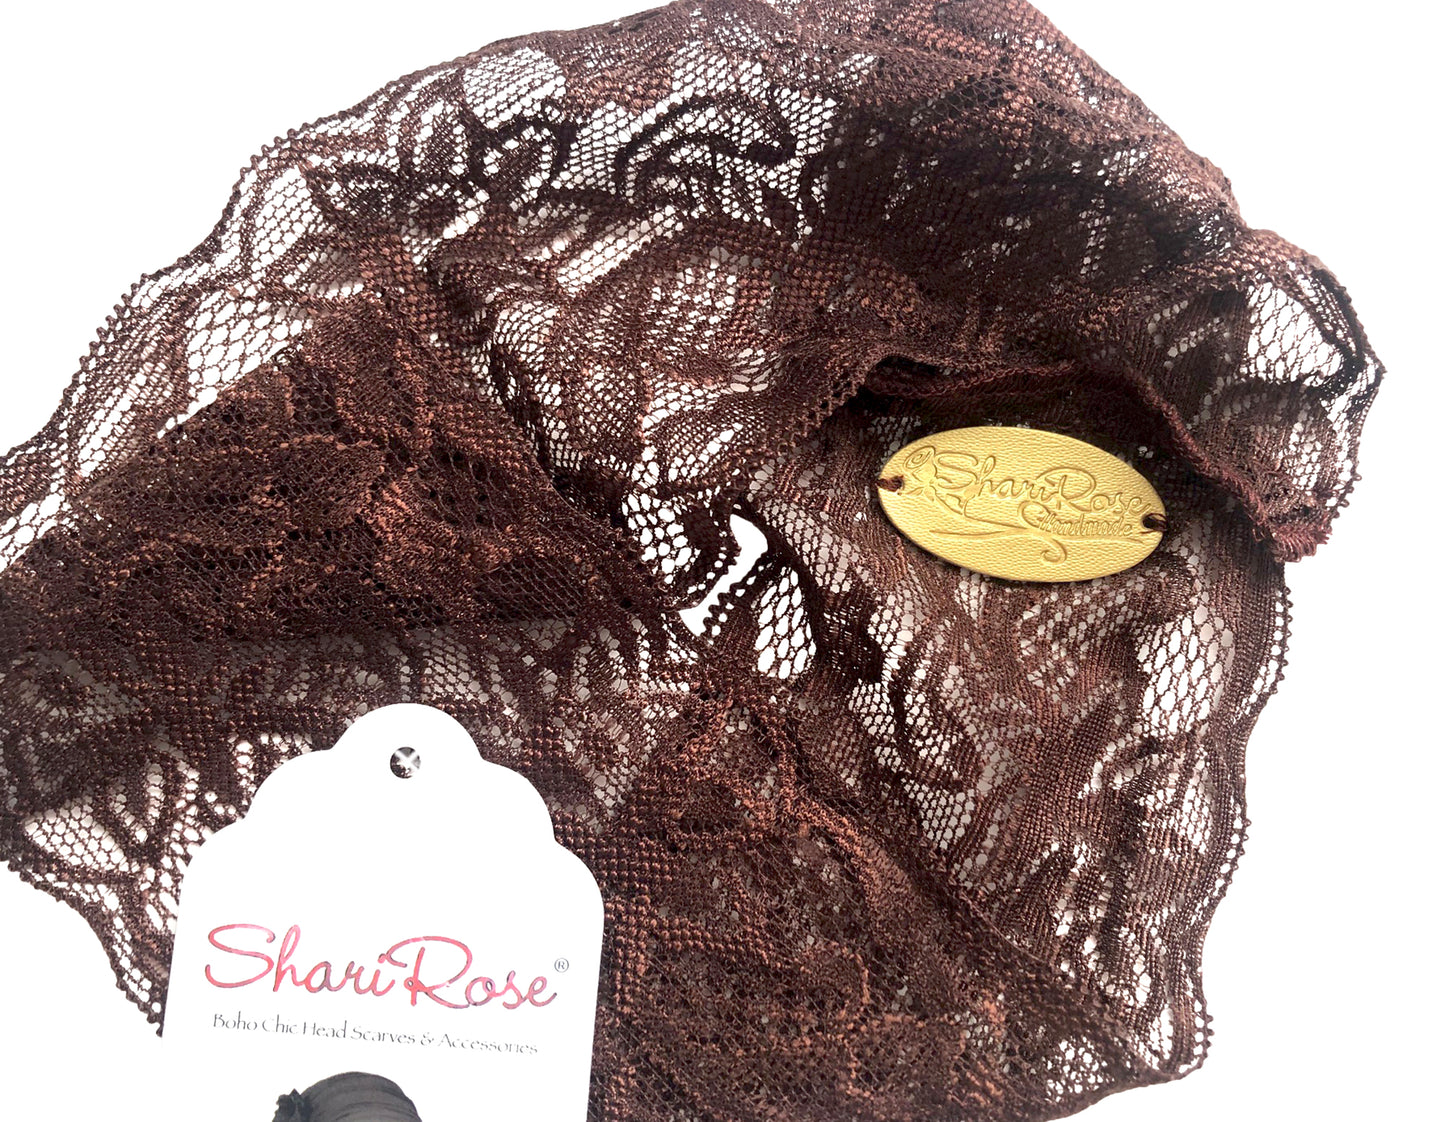 Perfect brown floral lace headband